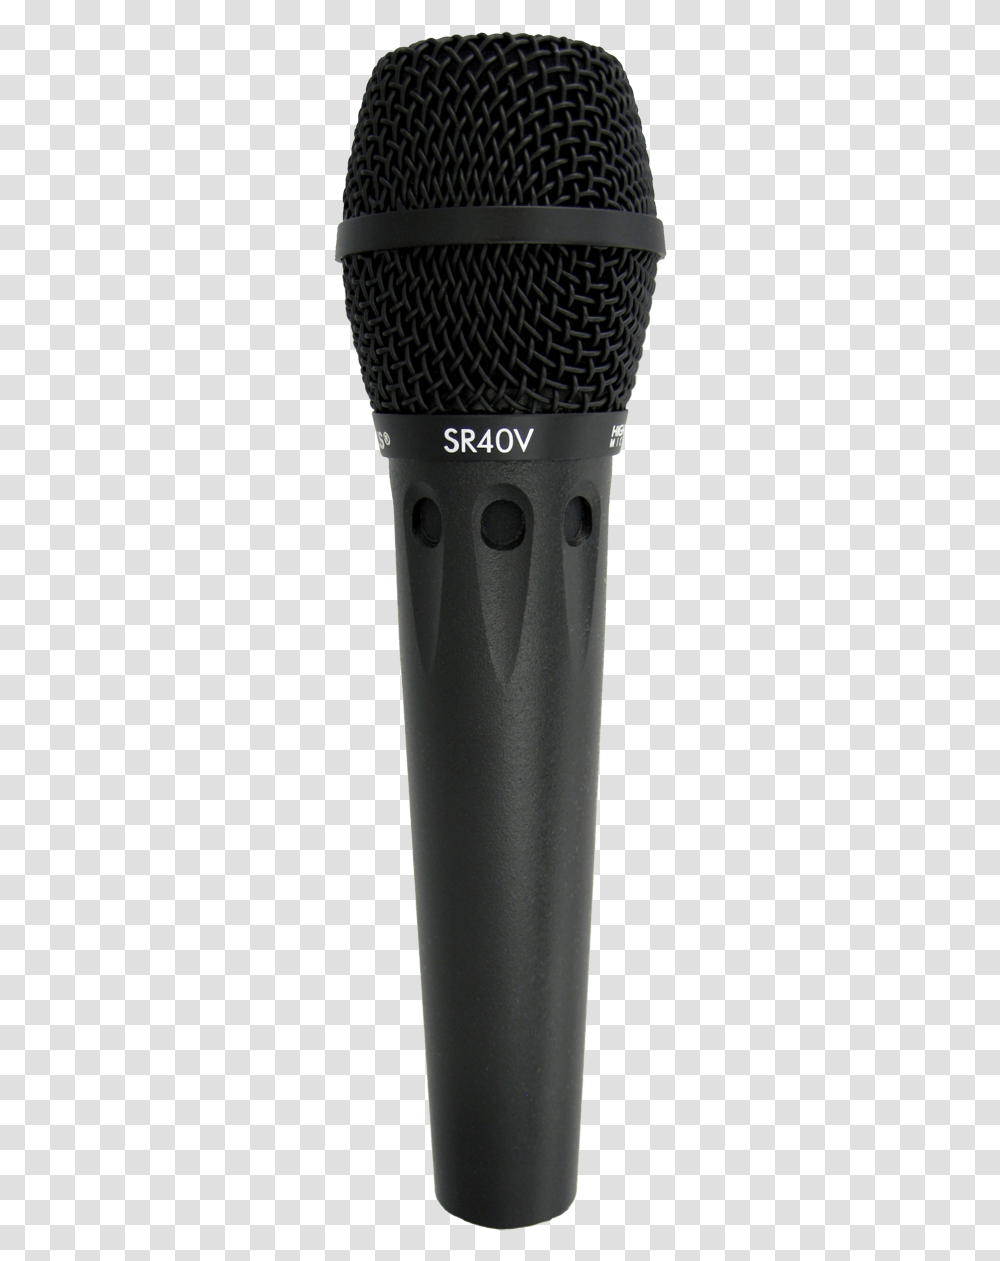 Microphone Definition In Electronics, Electrical Device Transparent Png